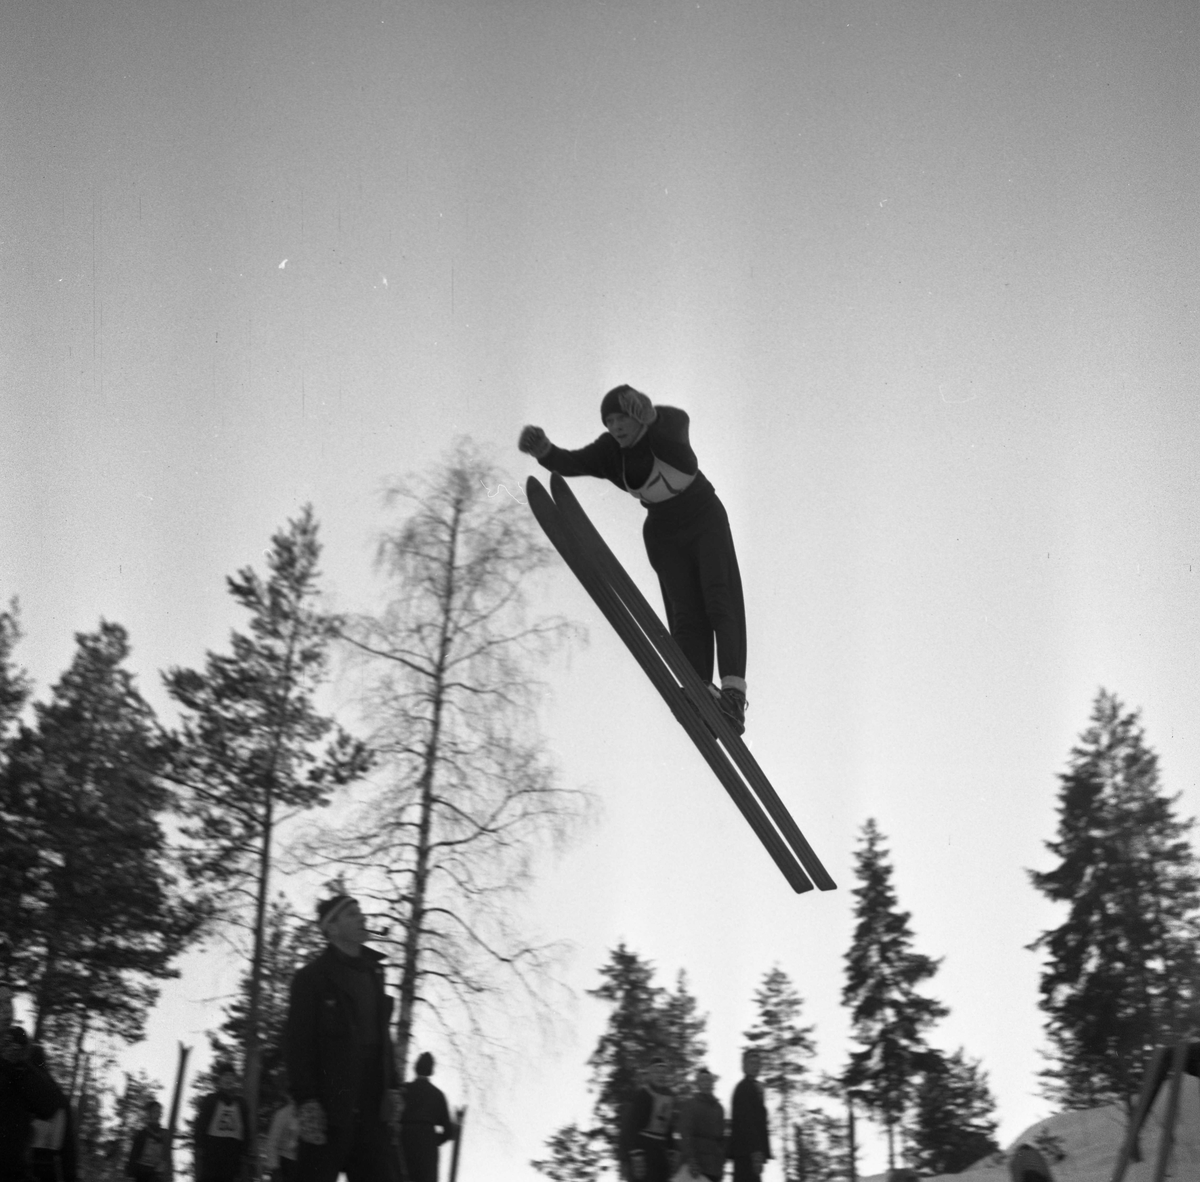 Ski jumping for young boys